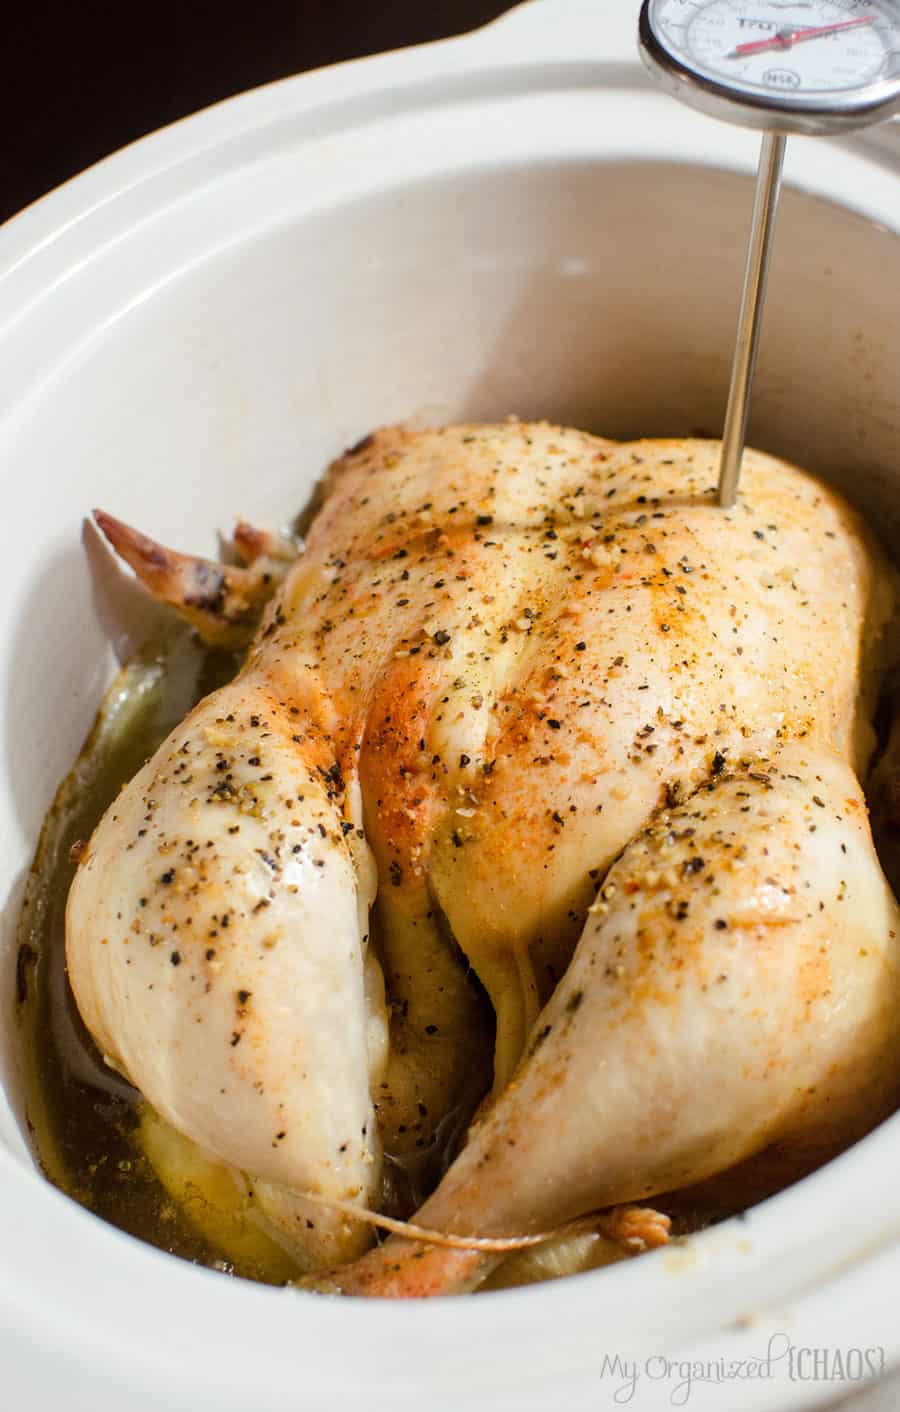 Cooking A Whole Chicken In A Crock Pot
 How to Cook a Whole Chicken in the Slow Cooker